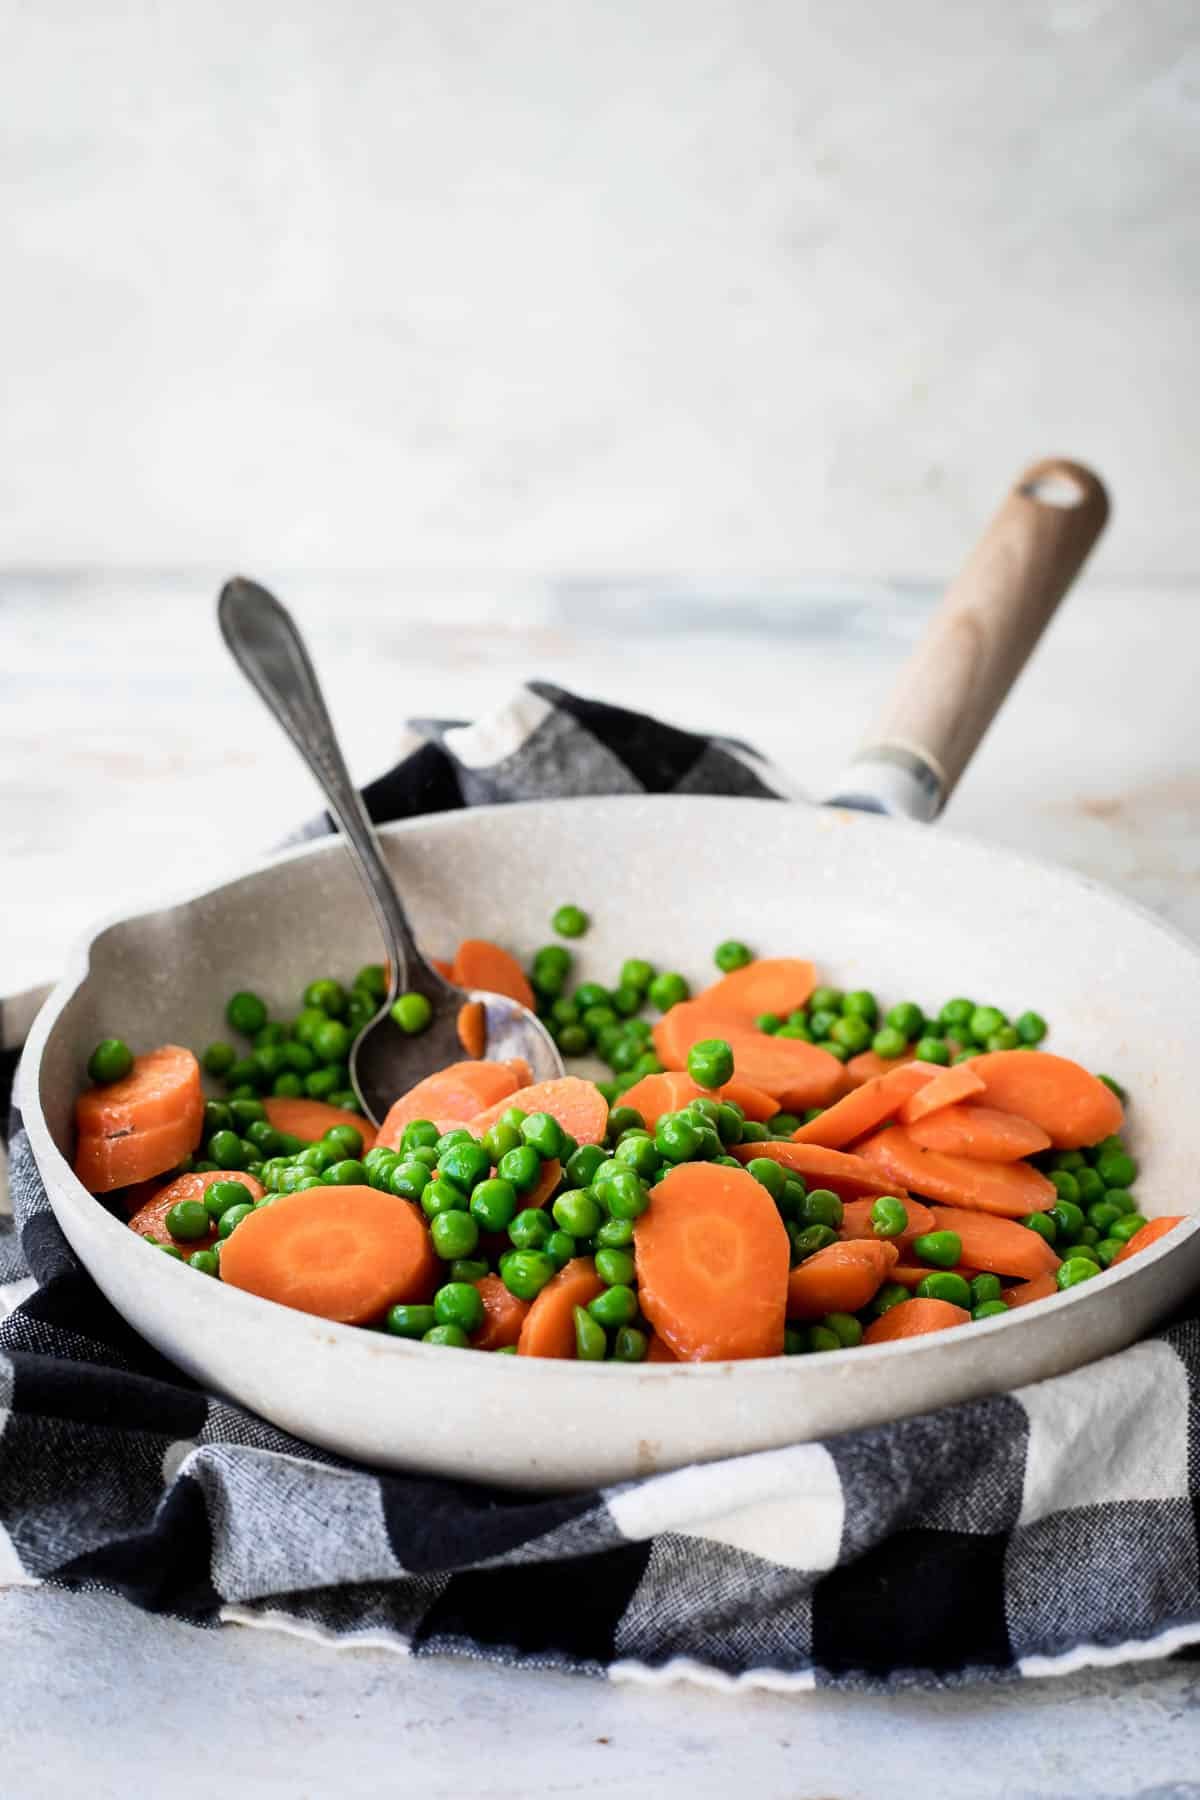 Peas and carrots in a white pan.